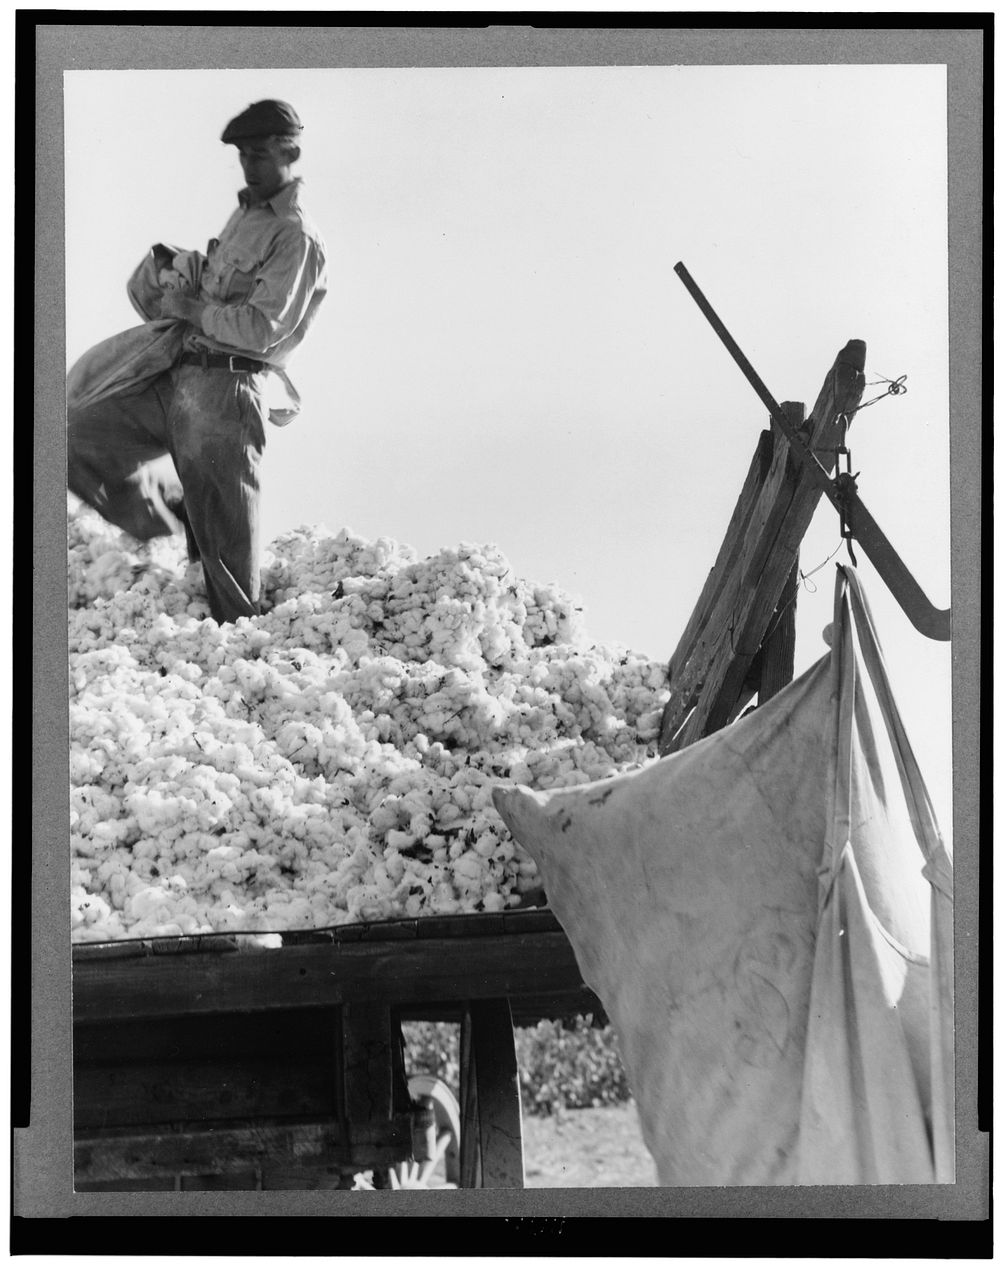 Loading cotton. San Joaquin Valley, California. Sourced from the Library of Congress.